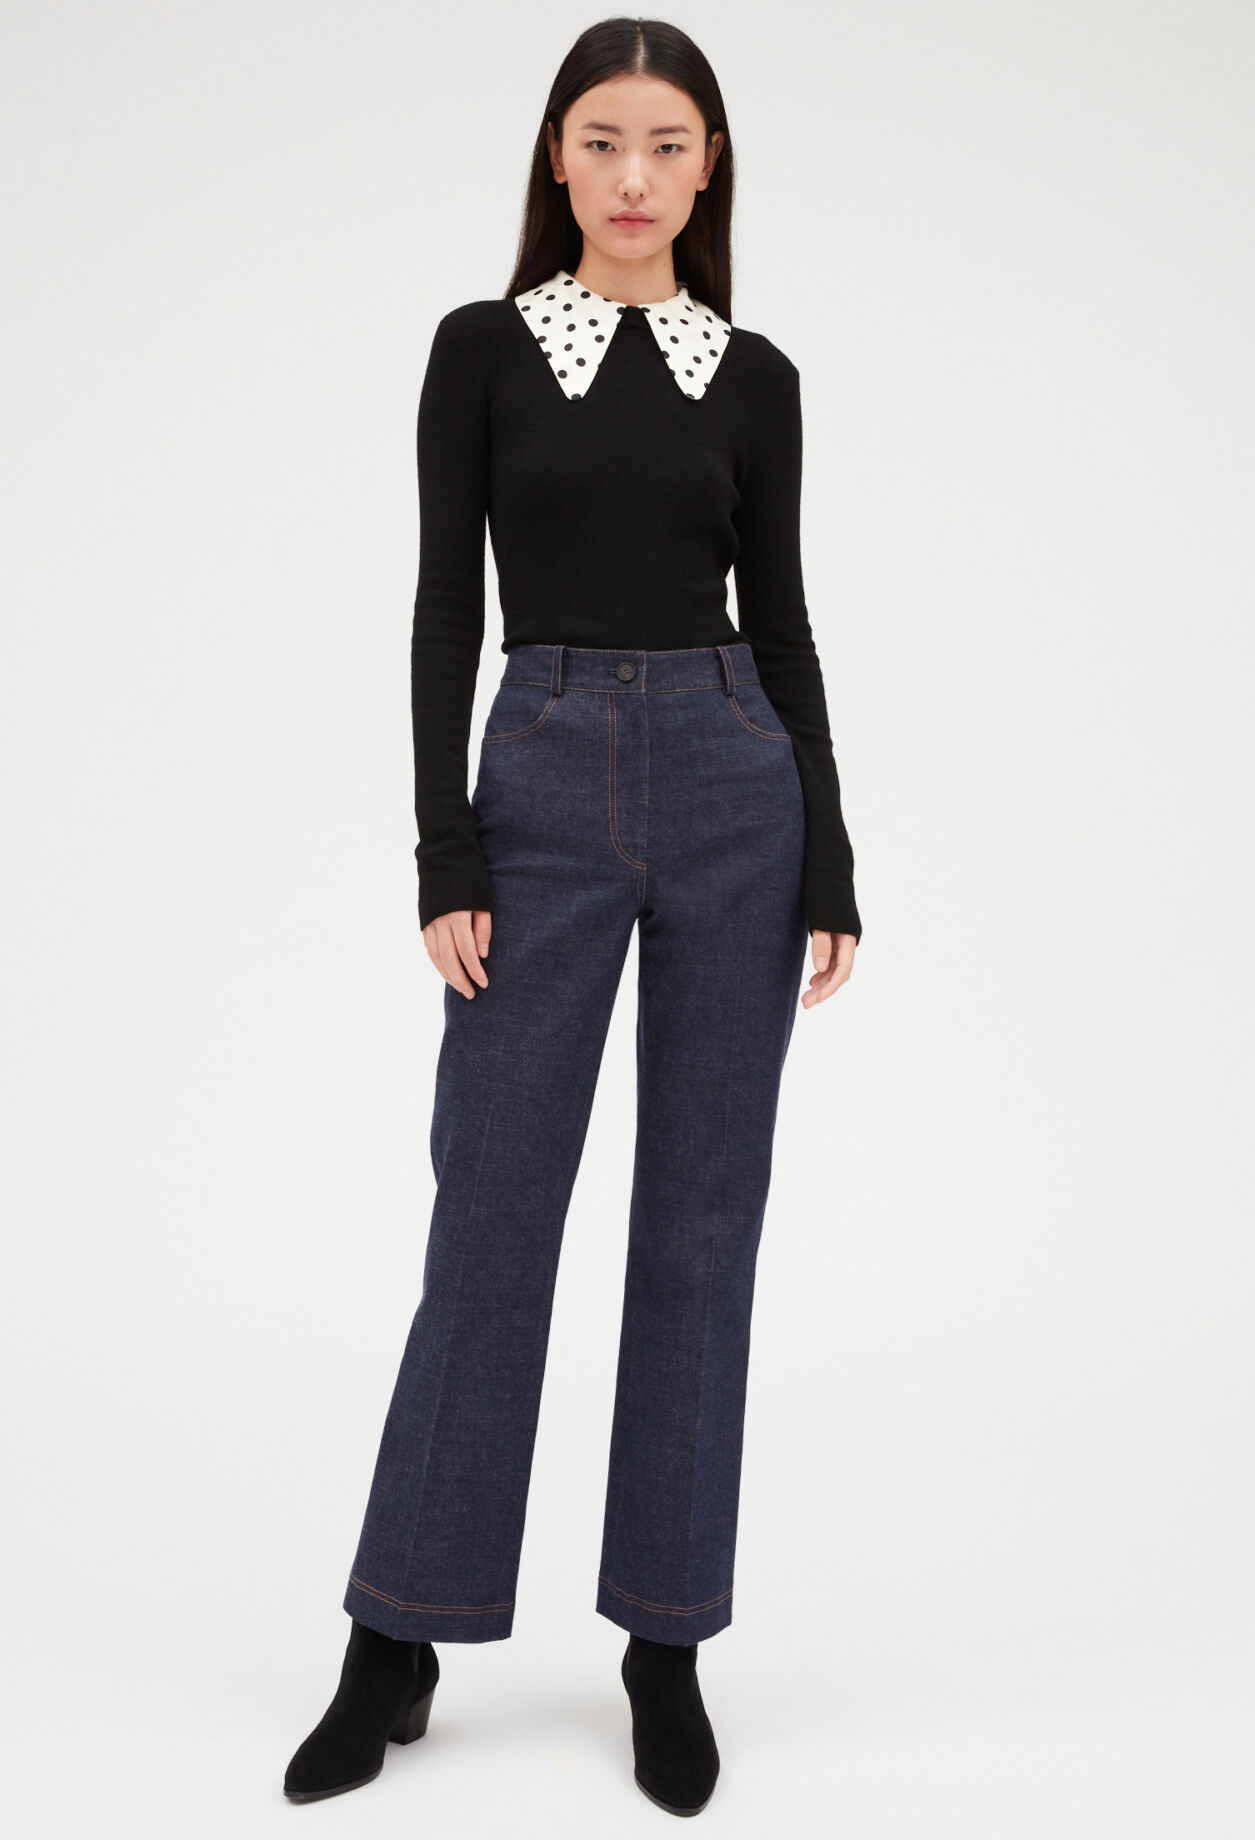 Two-tone jumper with removable collars | Claudie Pierlot